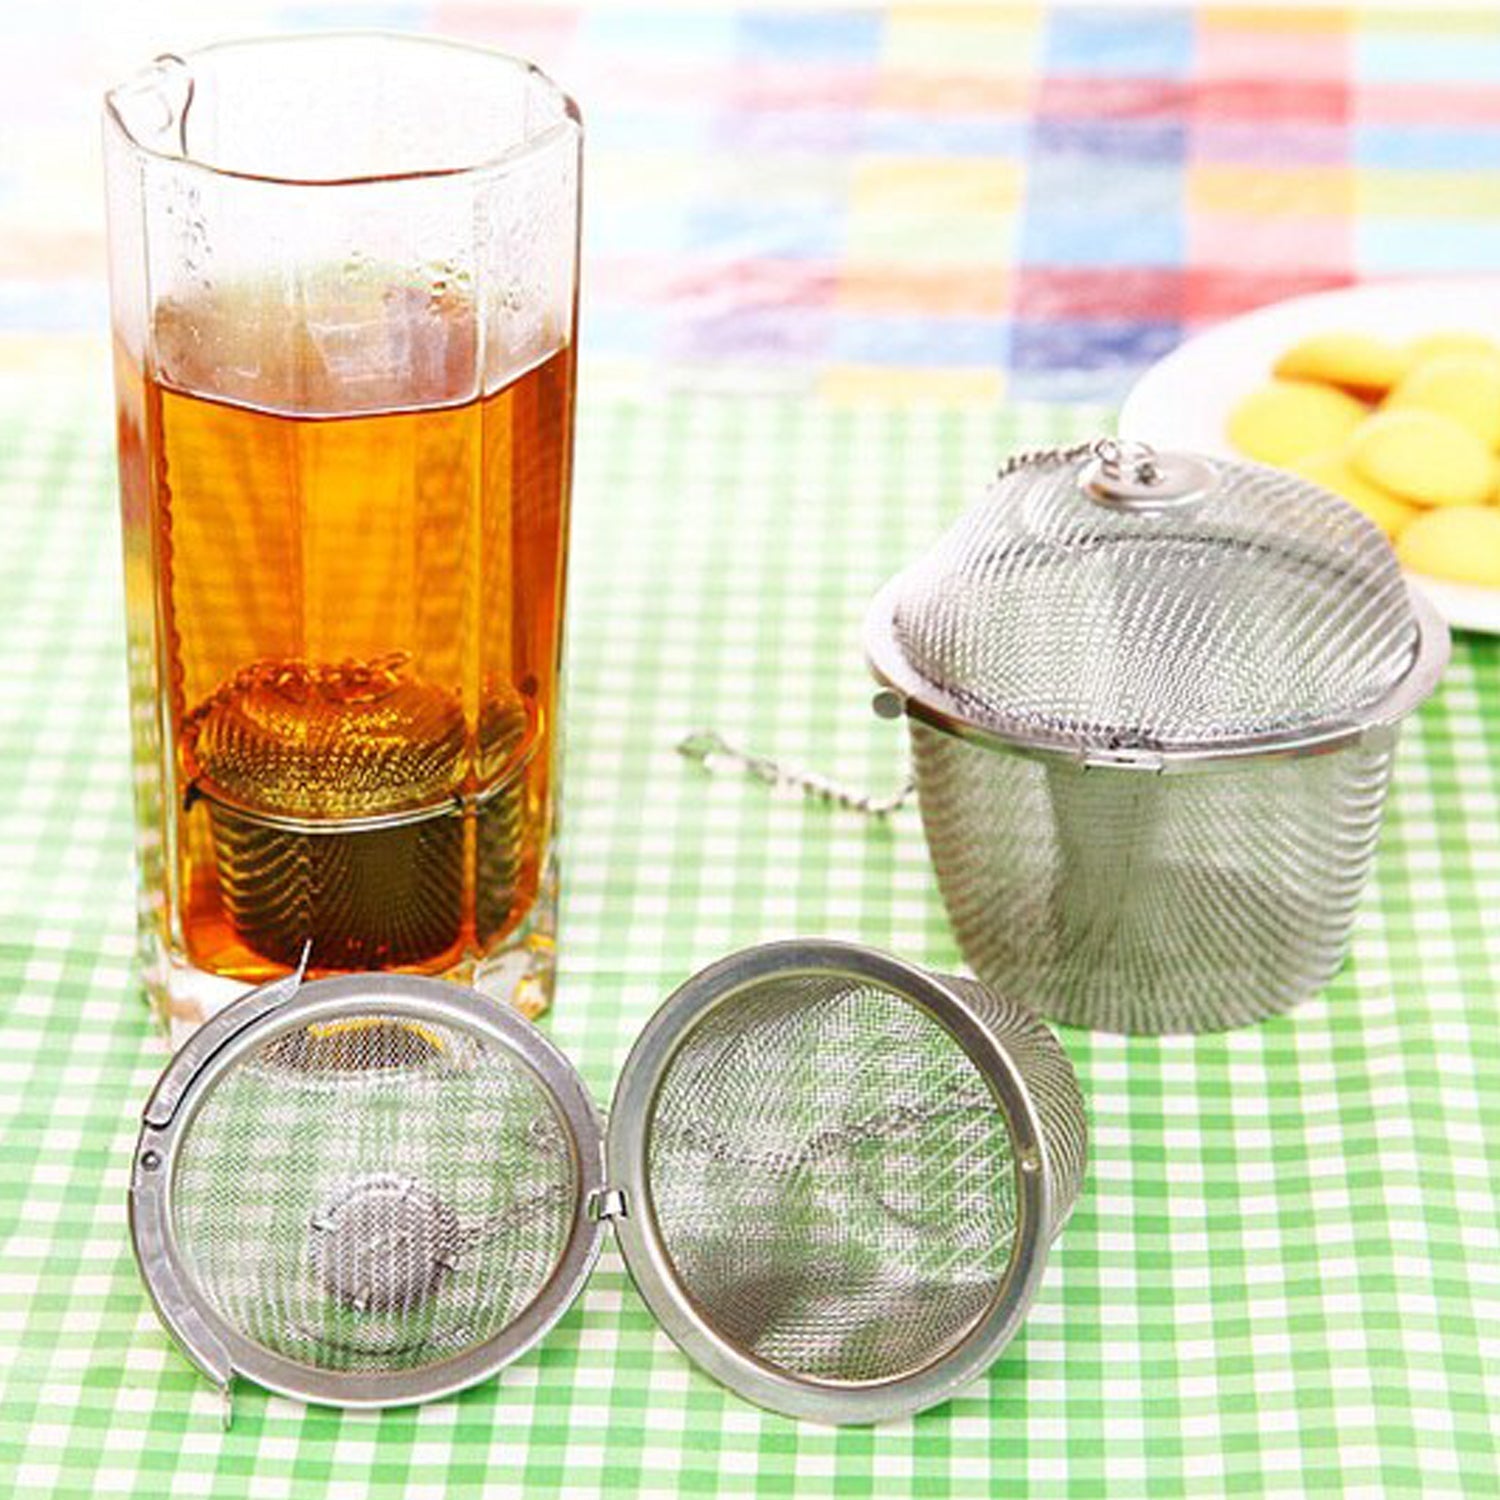 2744 SS Easy Tea Filter used for filtering tea purposes while making it in all kinds of official and household kitchen places etc. DeoDap